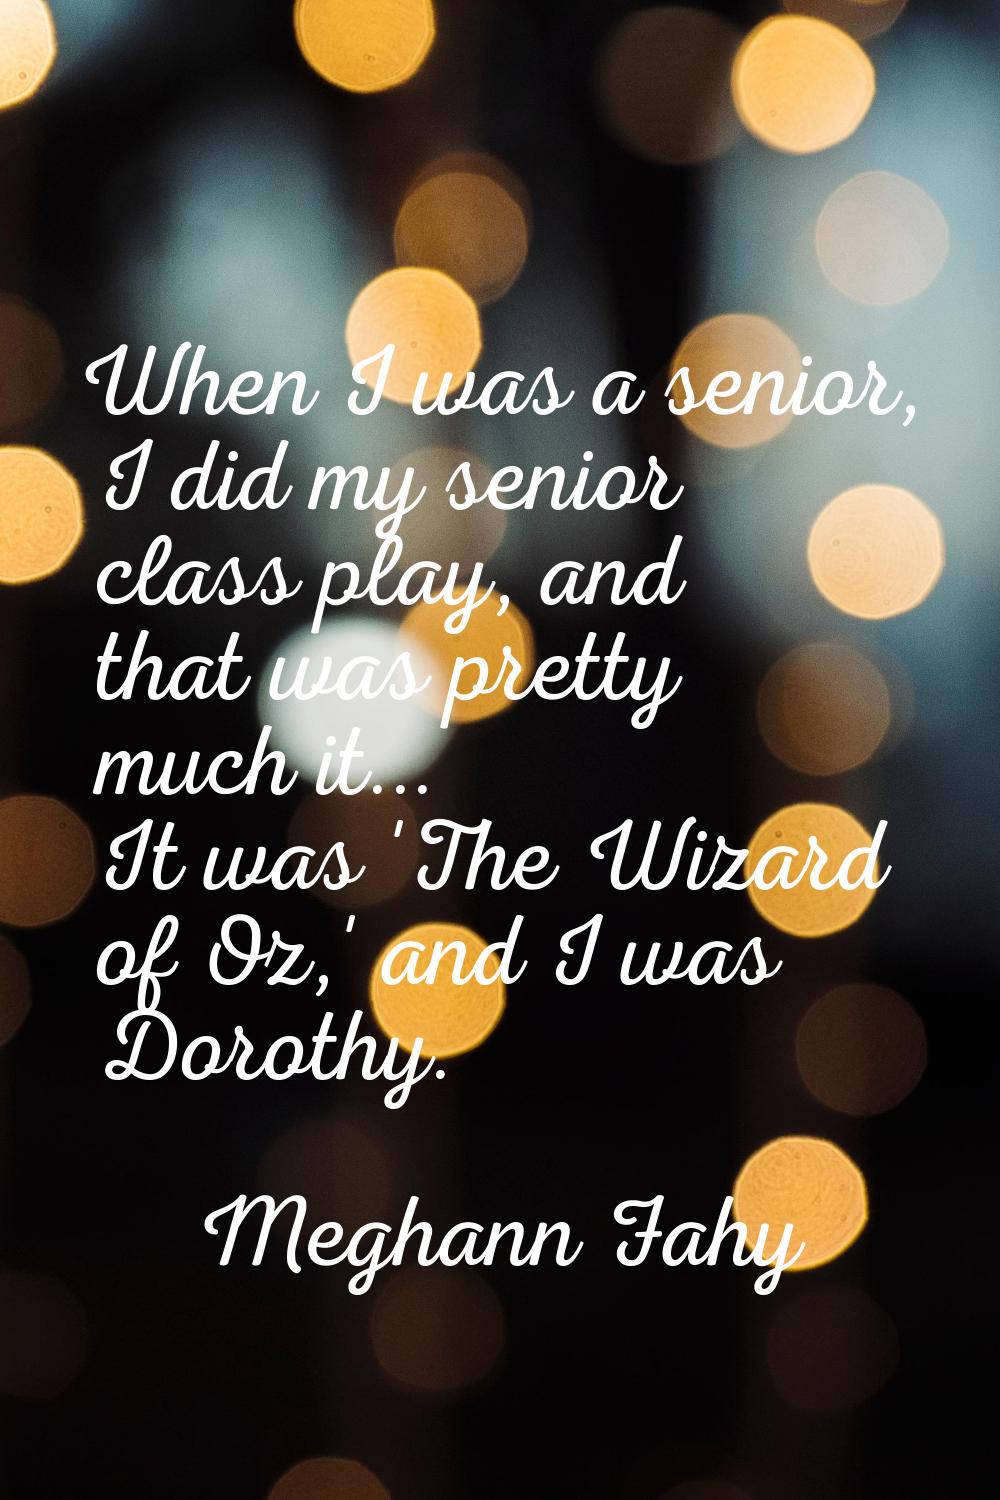 When I was a senior, I did my senior class play, and that was pretty much it... It was 'The Wizard 